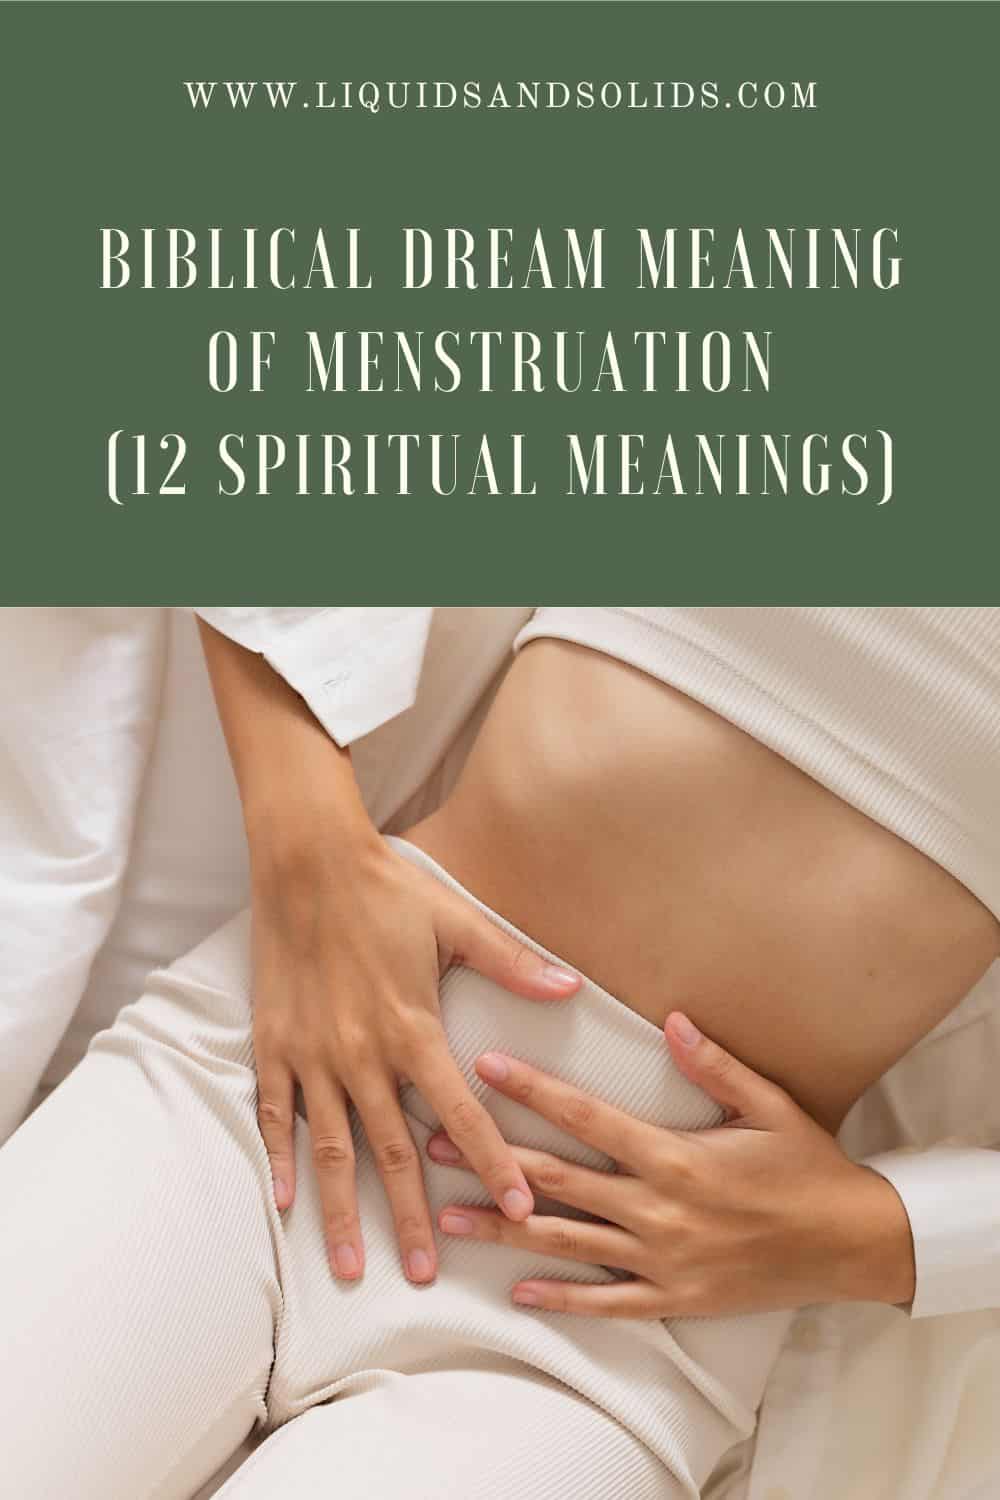 How is Menstruation Referred to in The Bible?